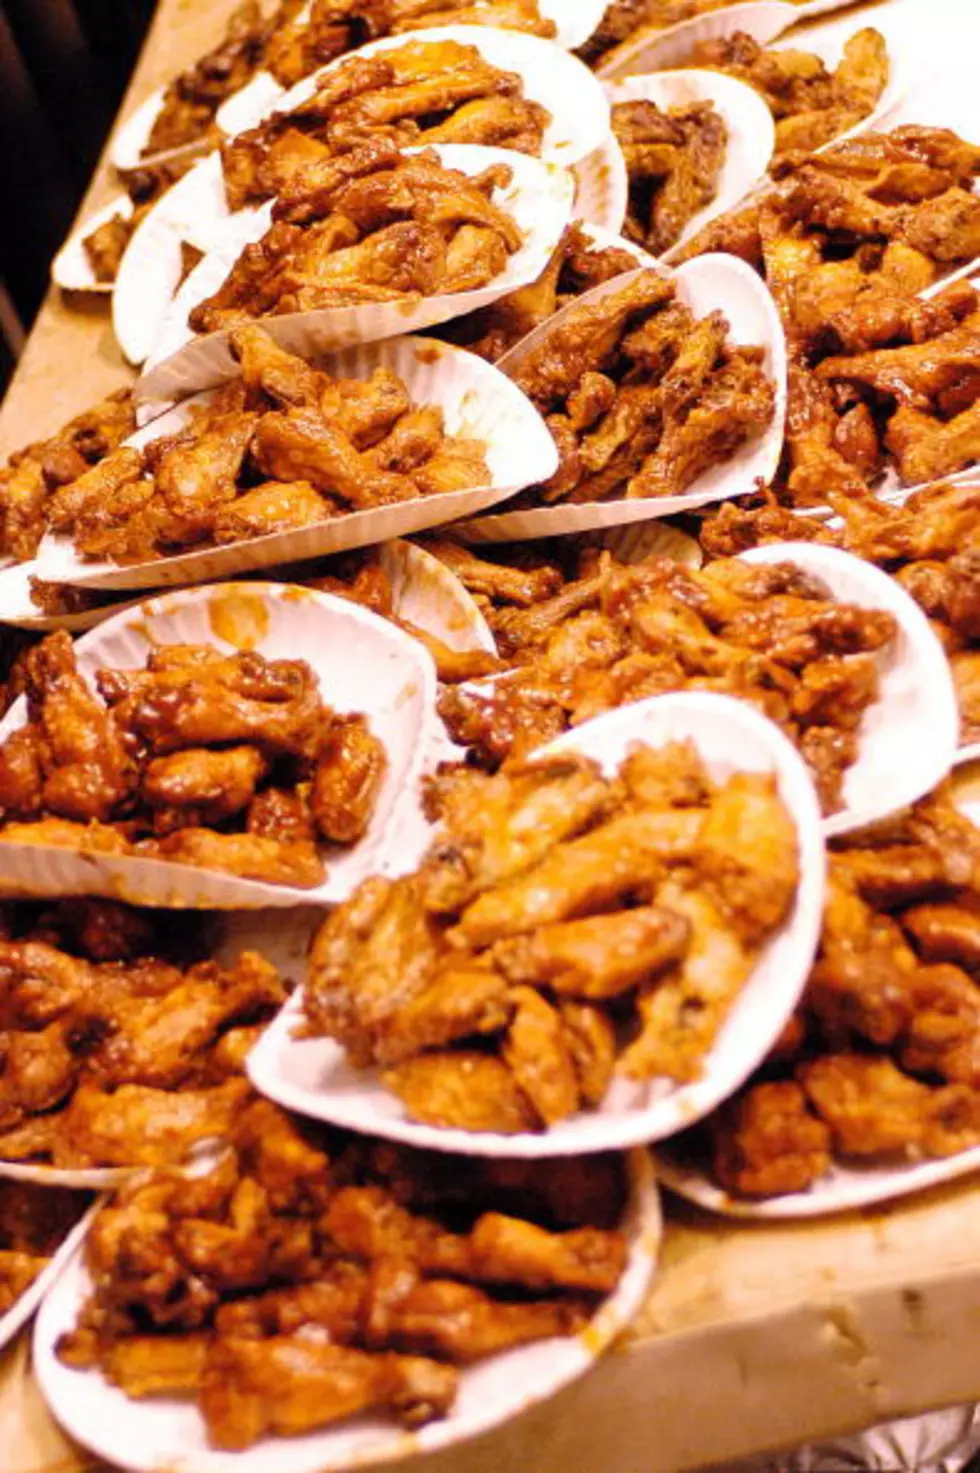 Yelp&#8217;s Highest-Rated Buffalo Wing Joint You&#8217;ve Never Heard Of